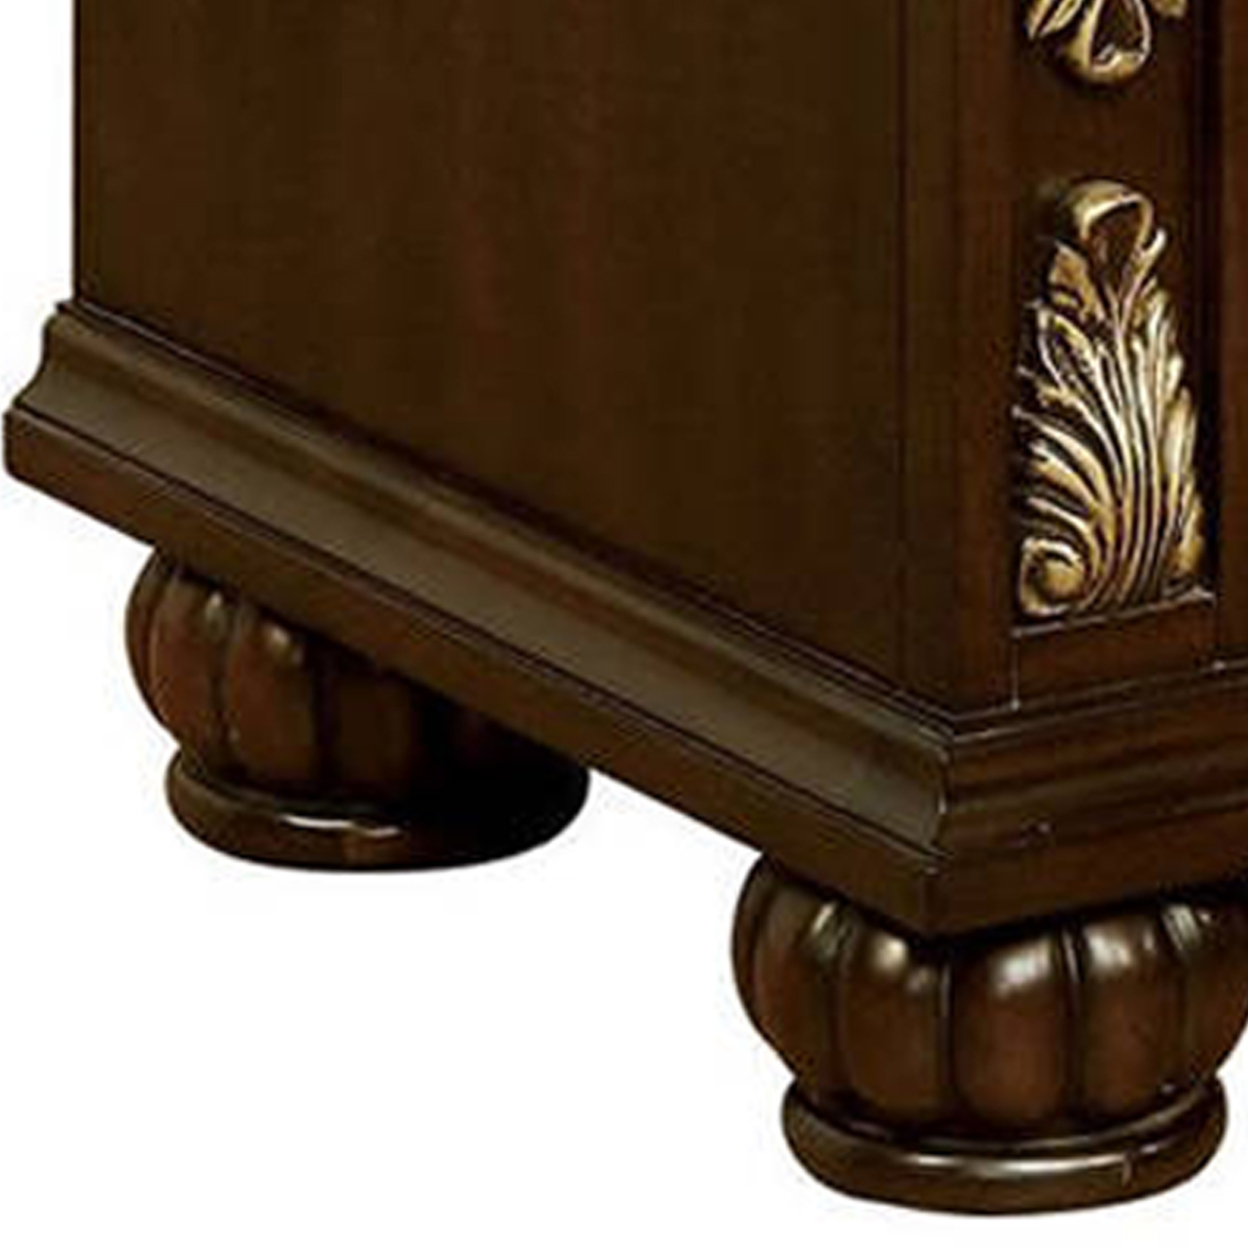 3 Drawer Wooden Nightstand With Decorative Accent And USB Plugin, Brown- Saltoro Sherpi